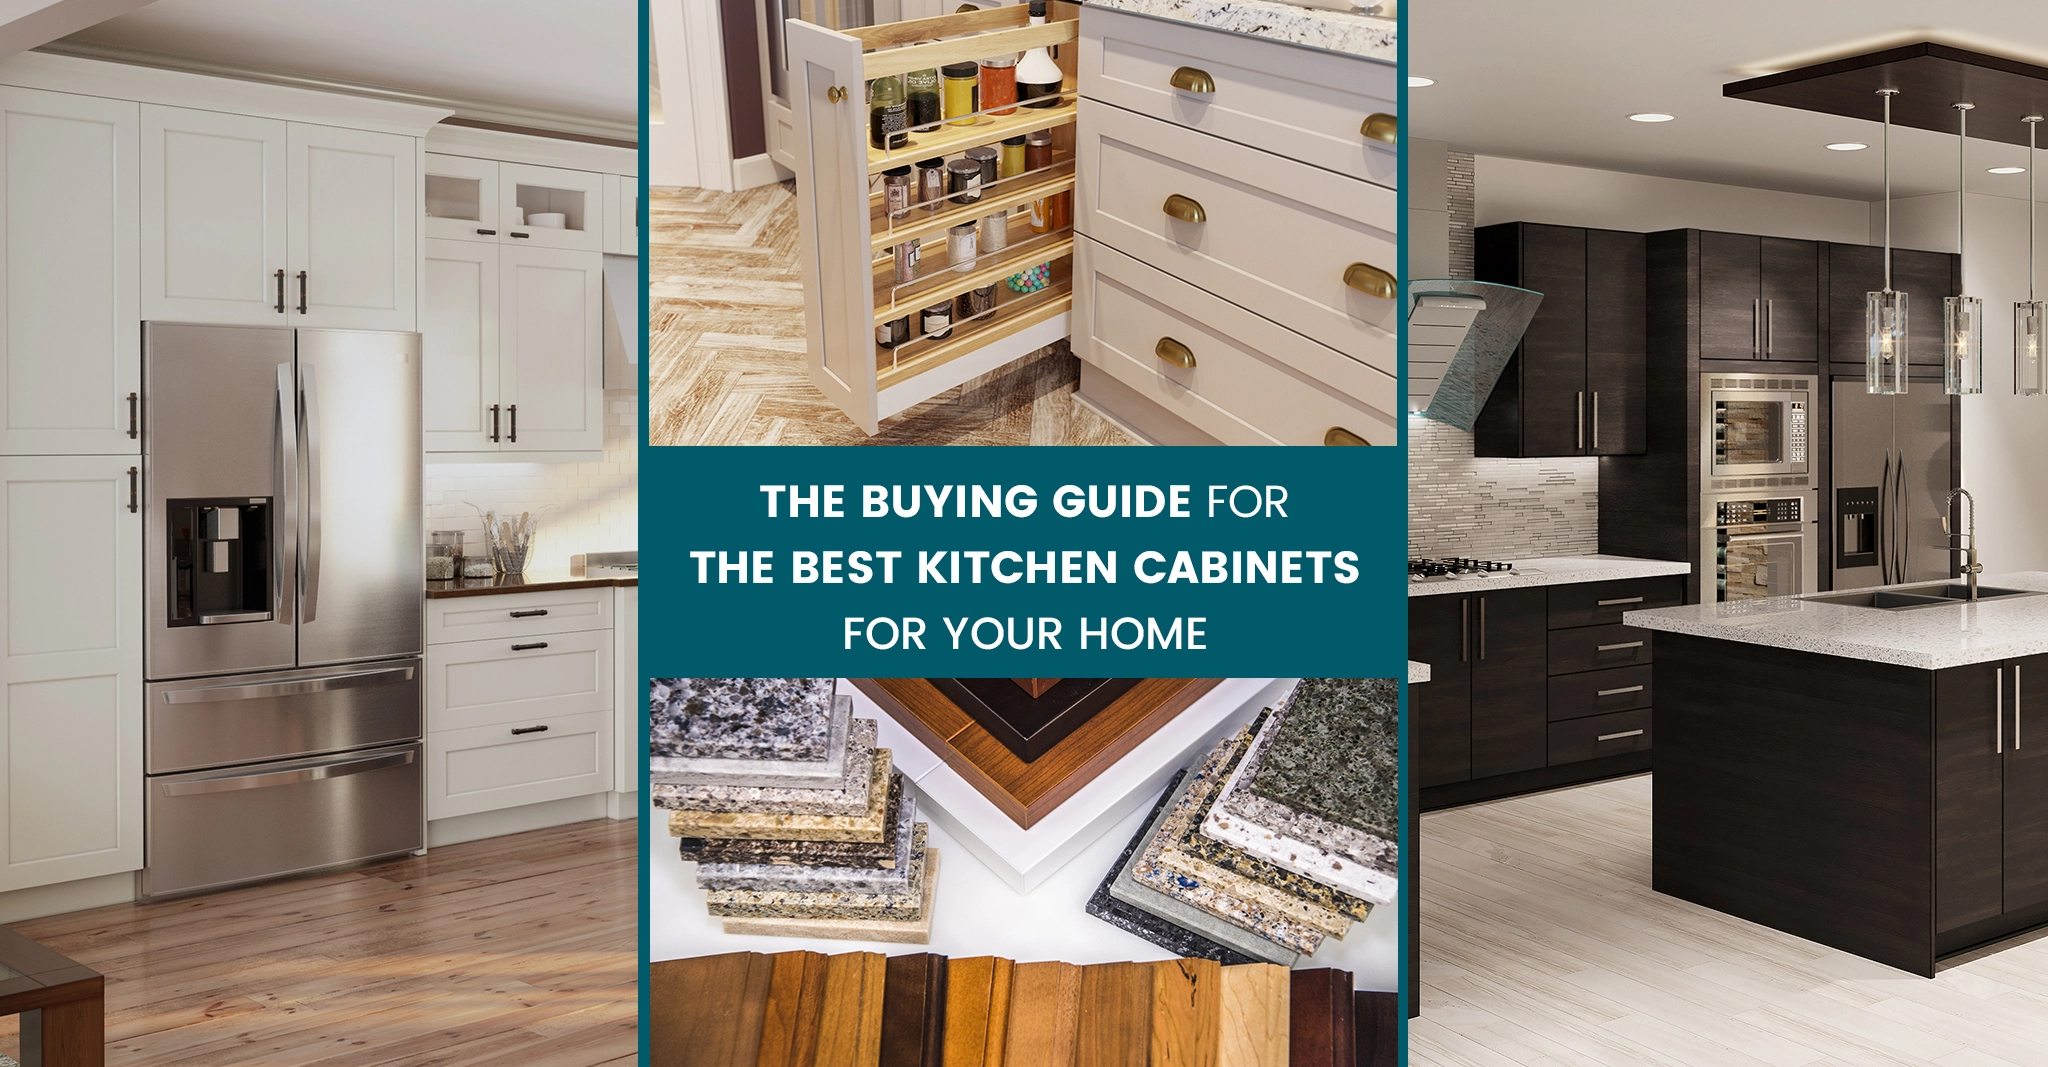 The Buying Guide for The Best Kitchen Cabinets For Your Home